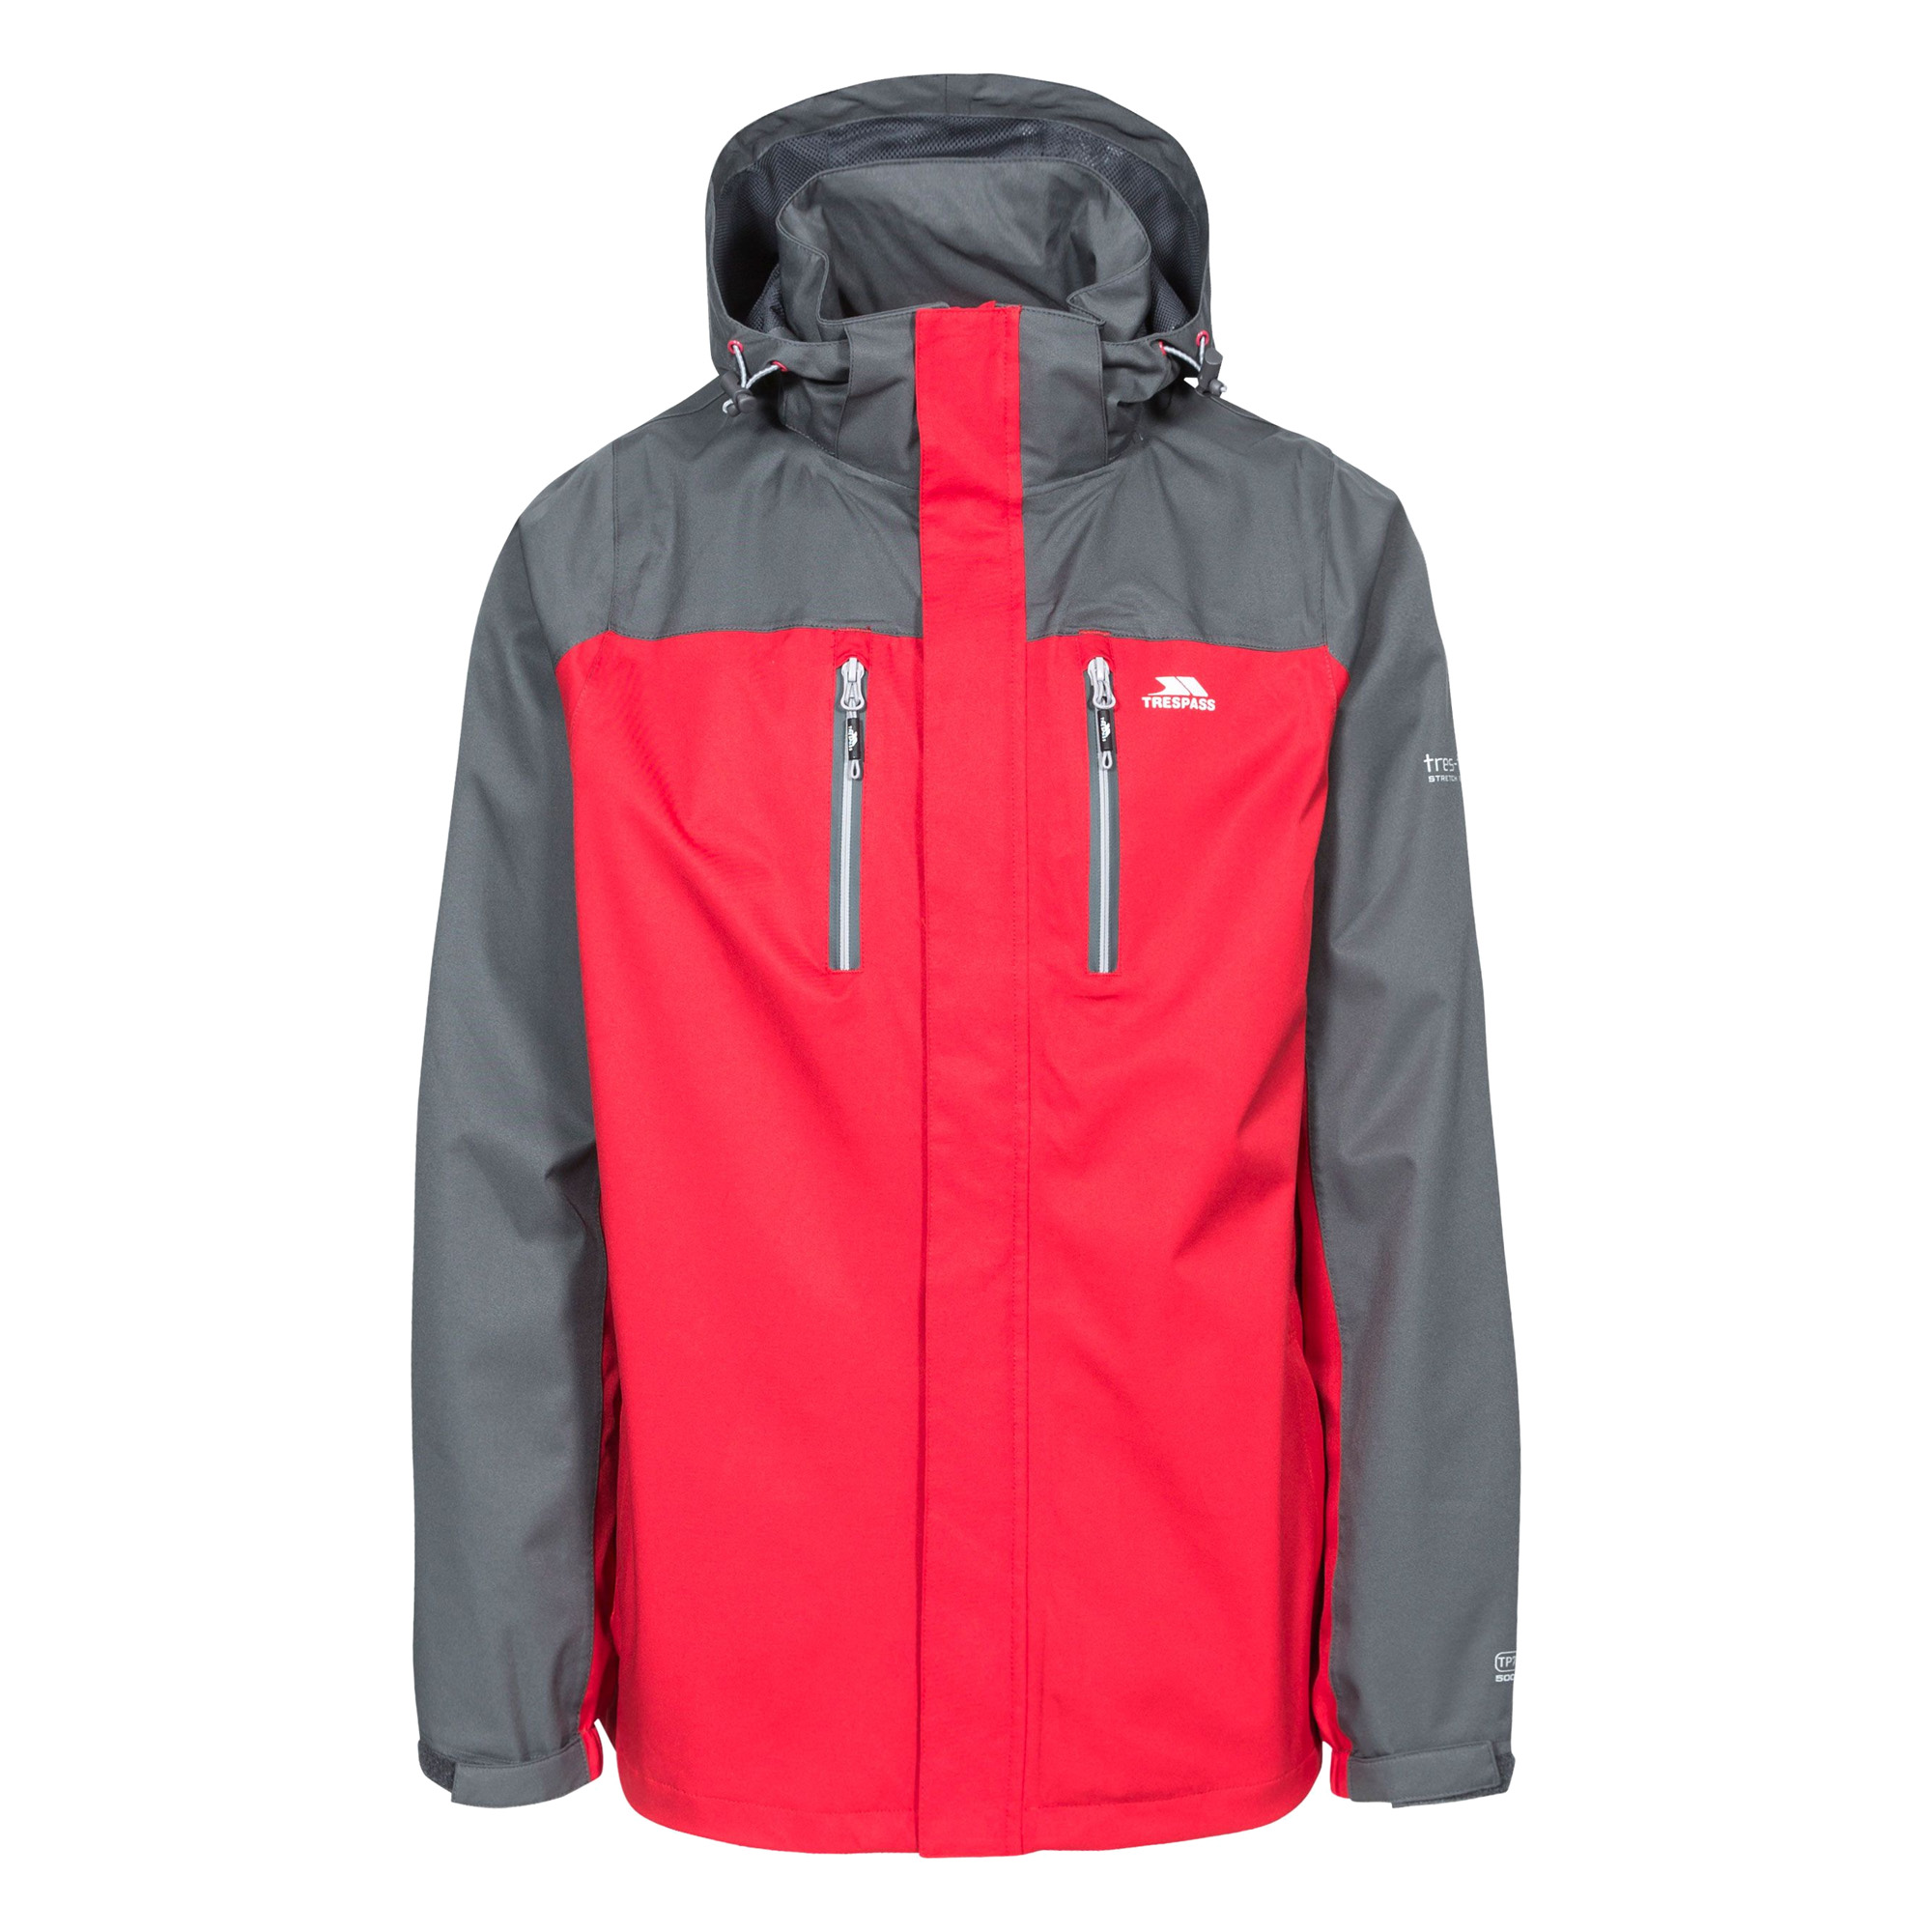 Chaqueta Impermeable Wooster Trespass - rojo - 